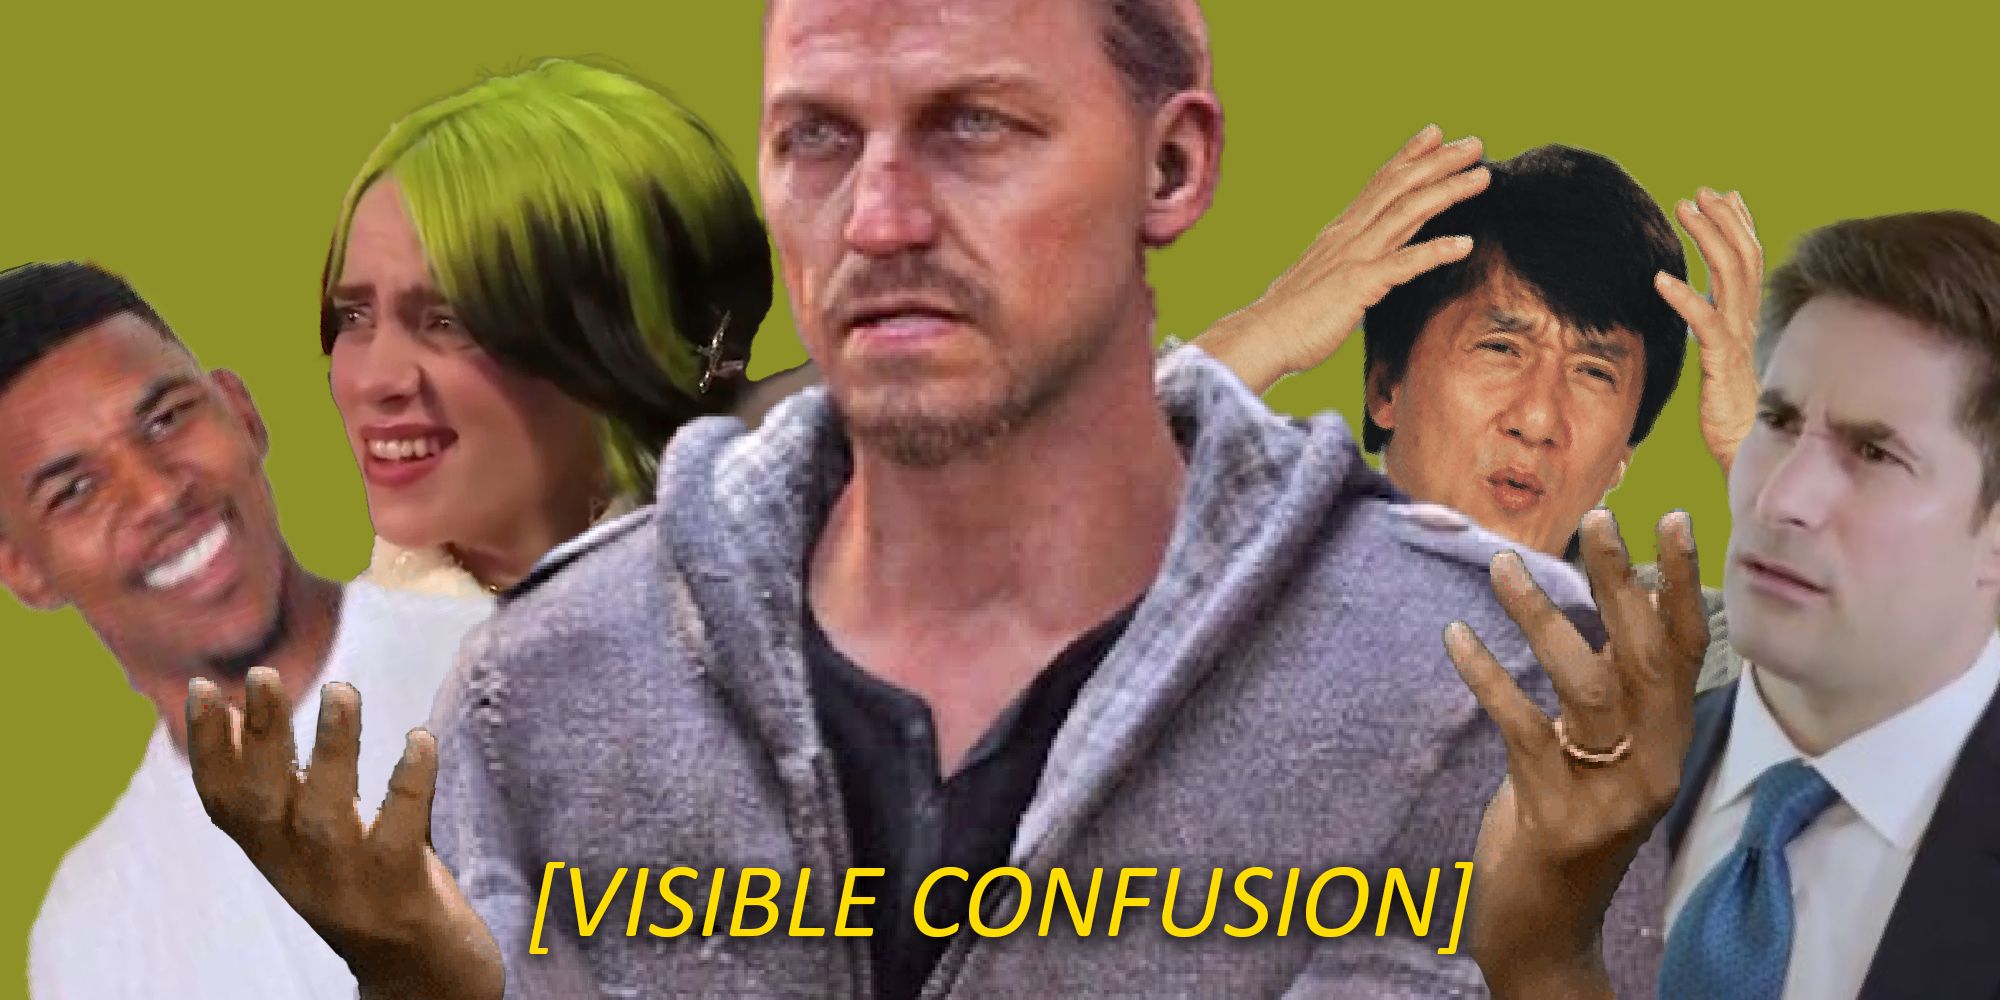 Robert from The Last of Us, surrounded by various memes of people expressing confusion. The caption reads: [Visible Confusion]